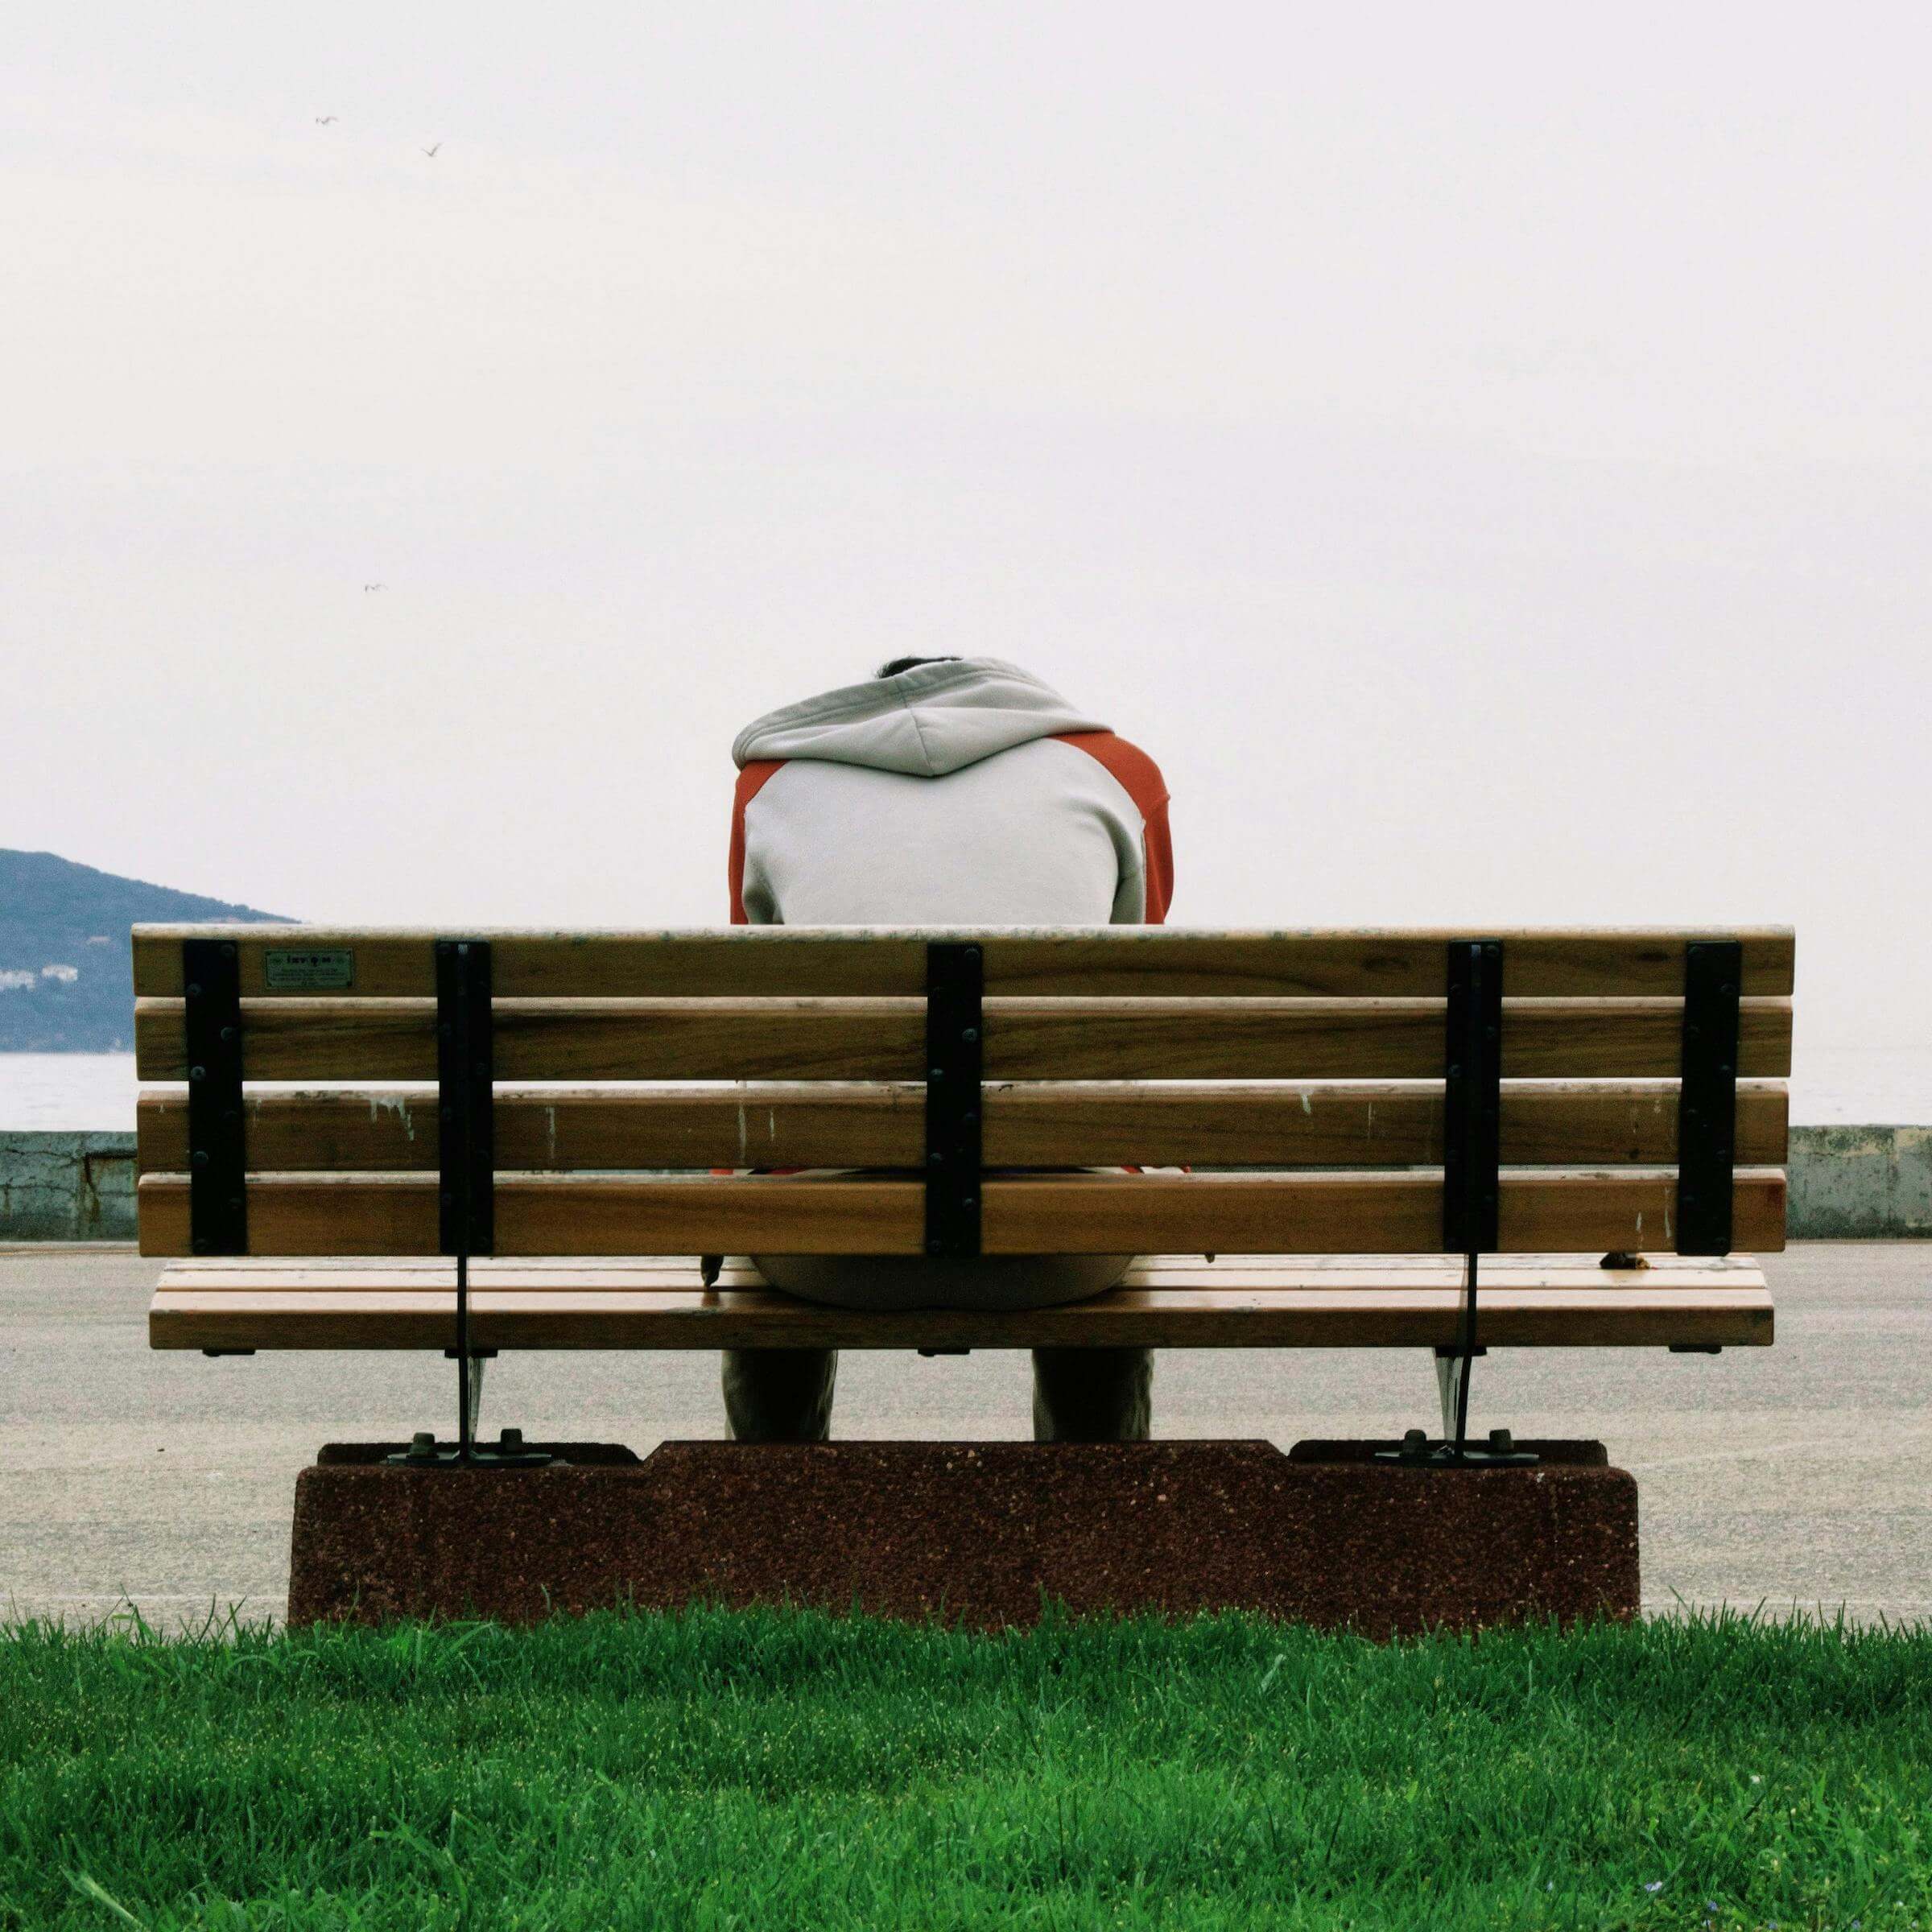 Lonely man on a bench with his hand down looking upset